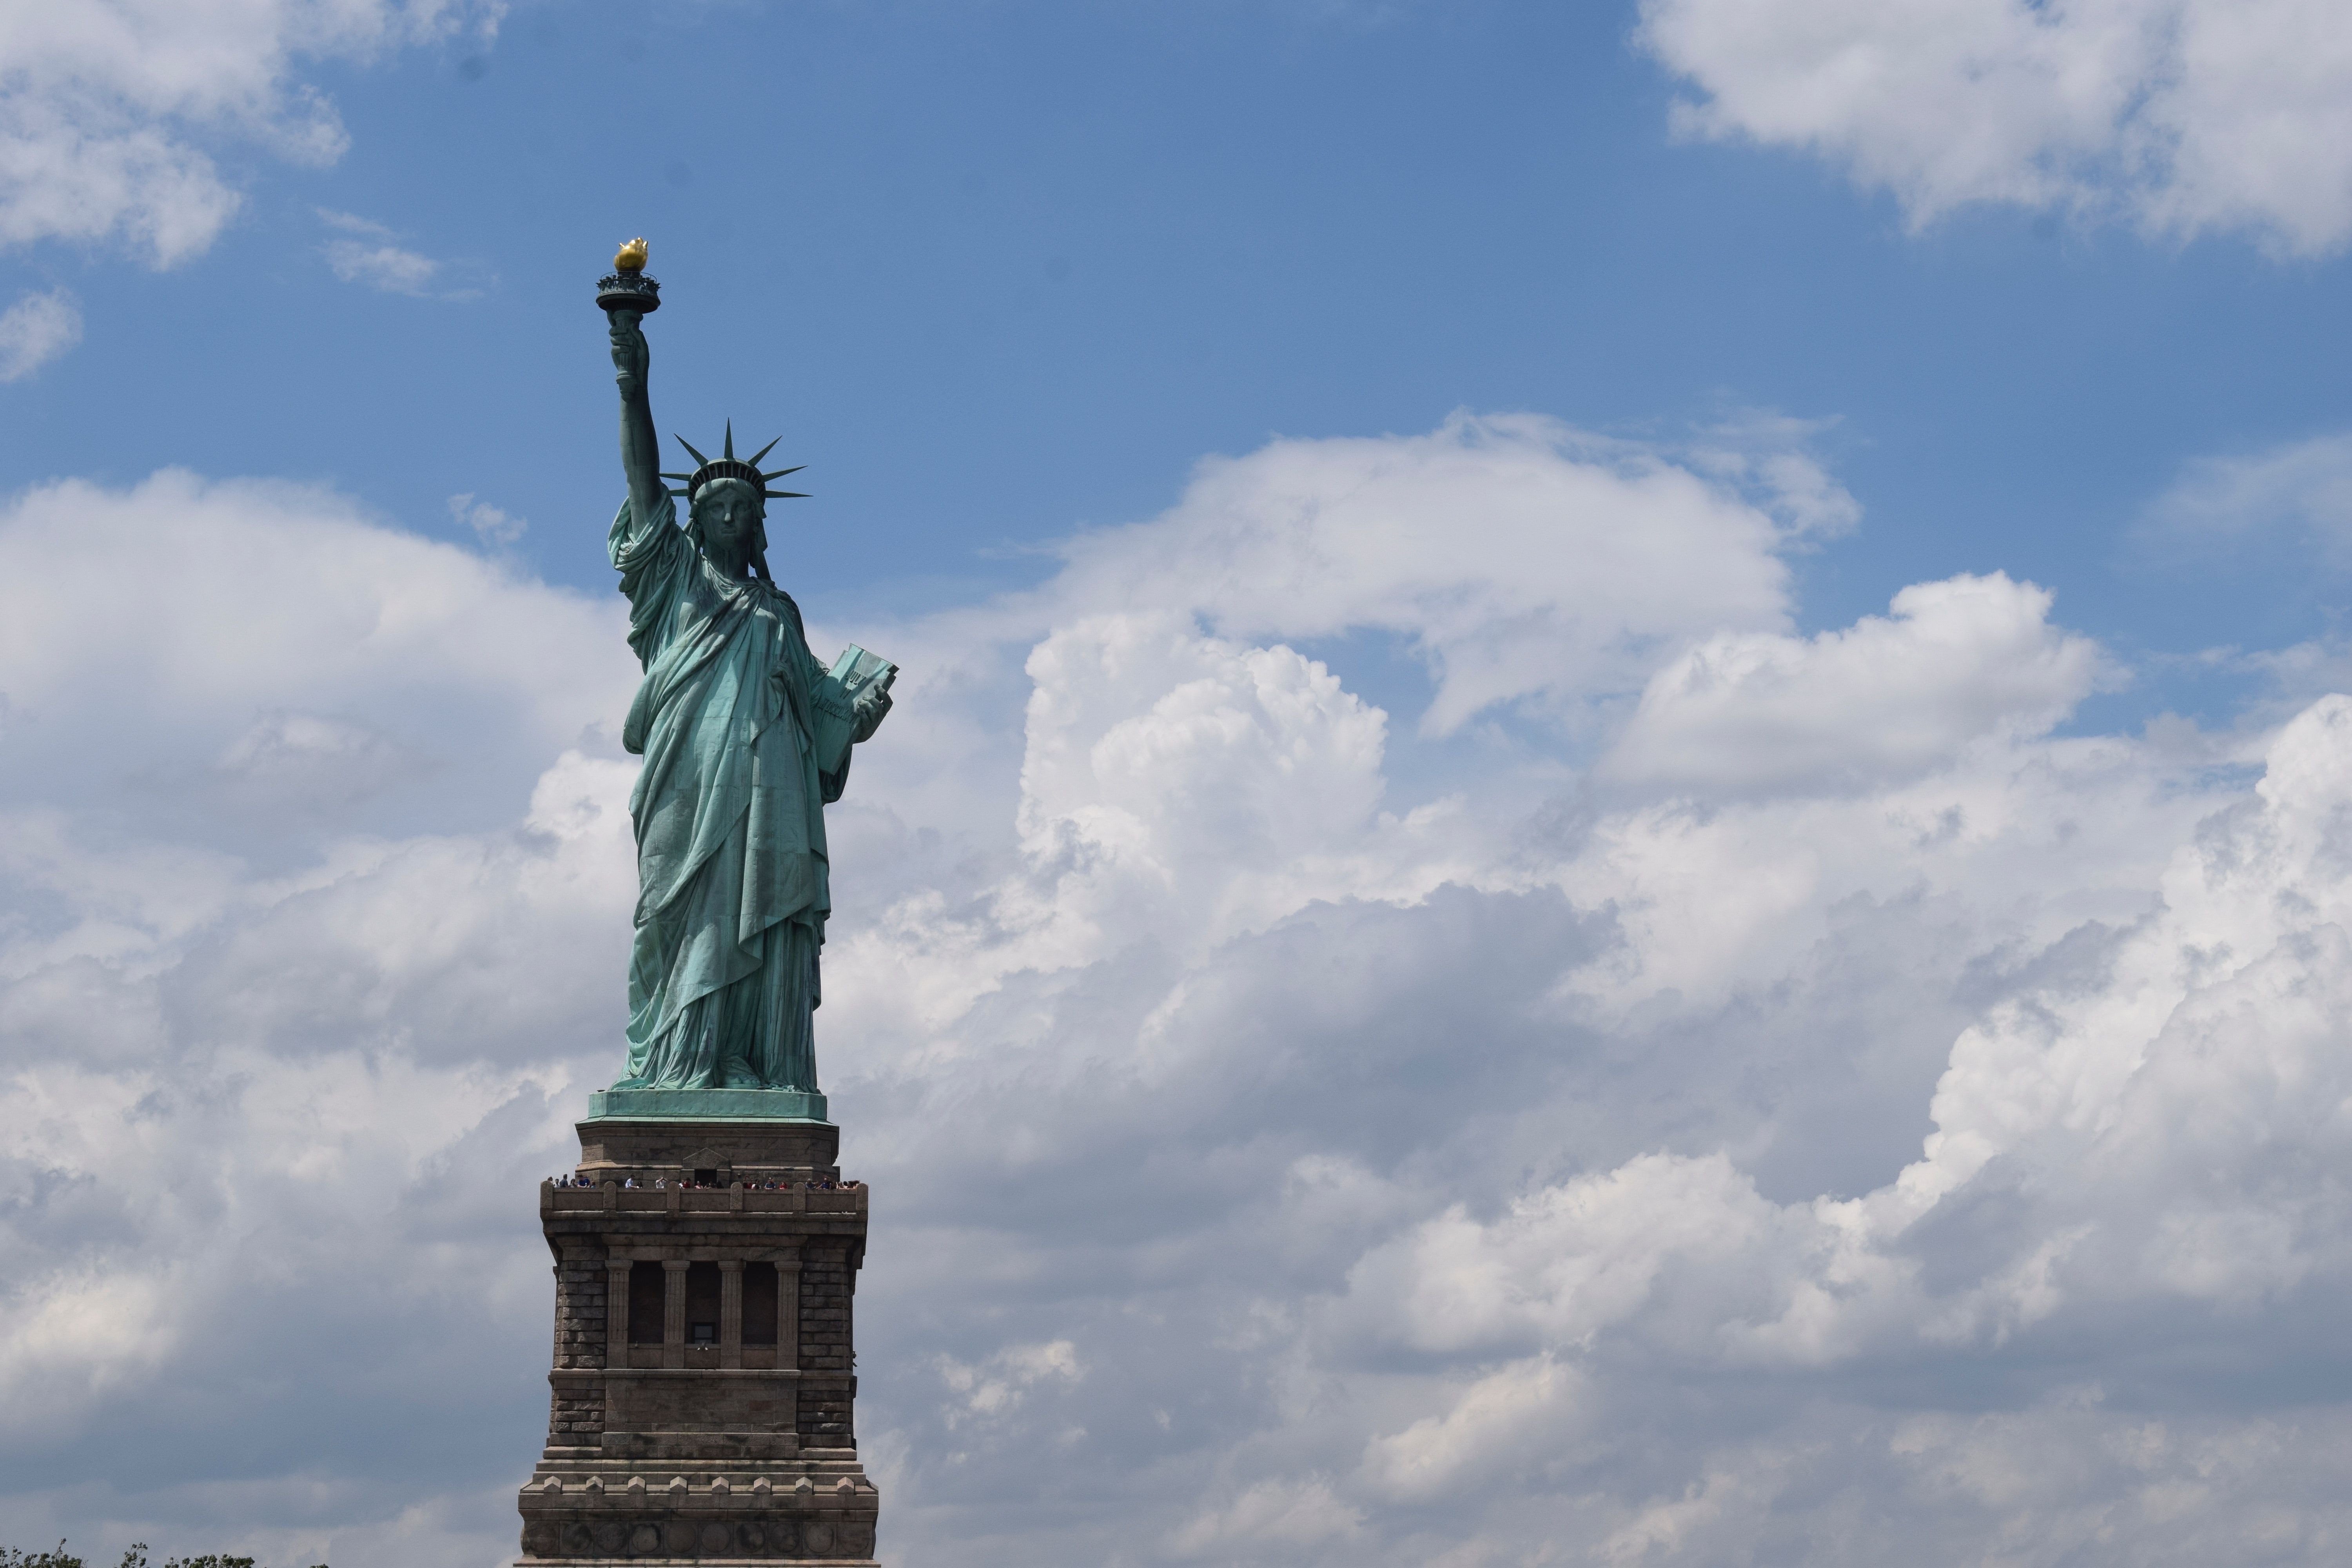 Statue of Liberty, Architecture, Outdoors, Tourist attraction, Tourism, HQ Photo